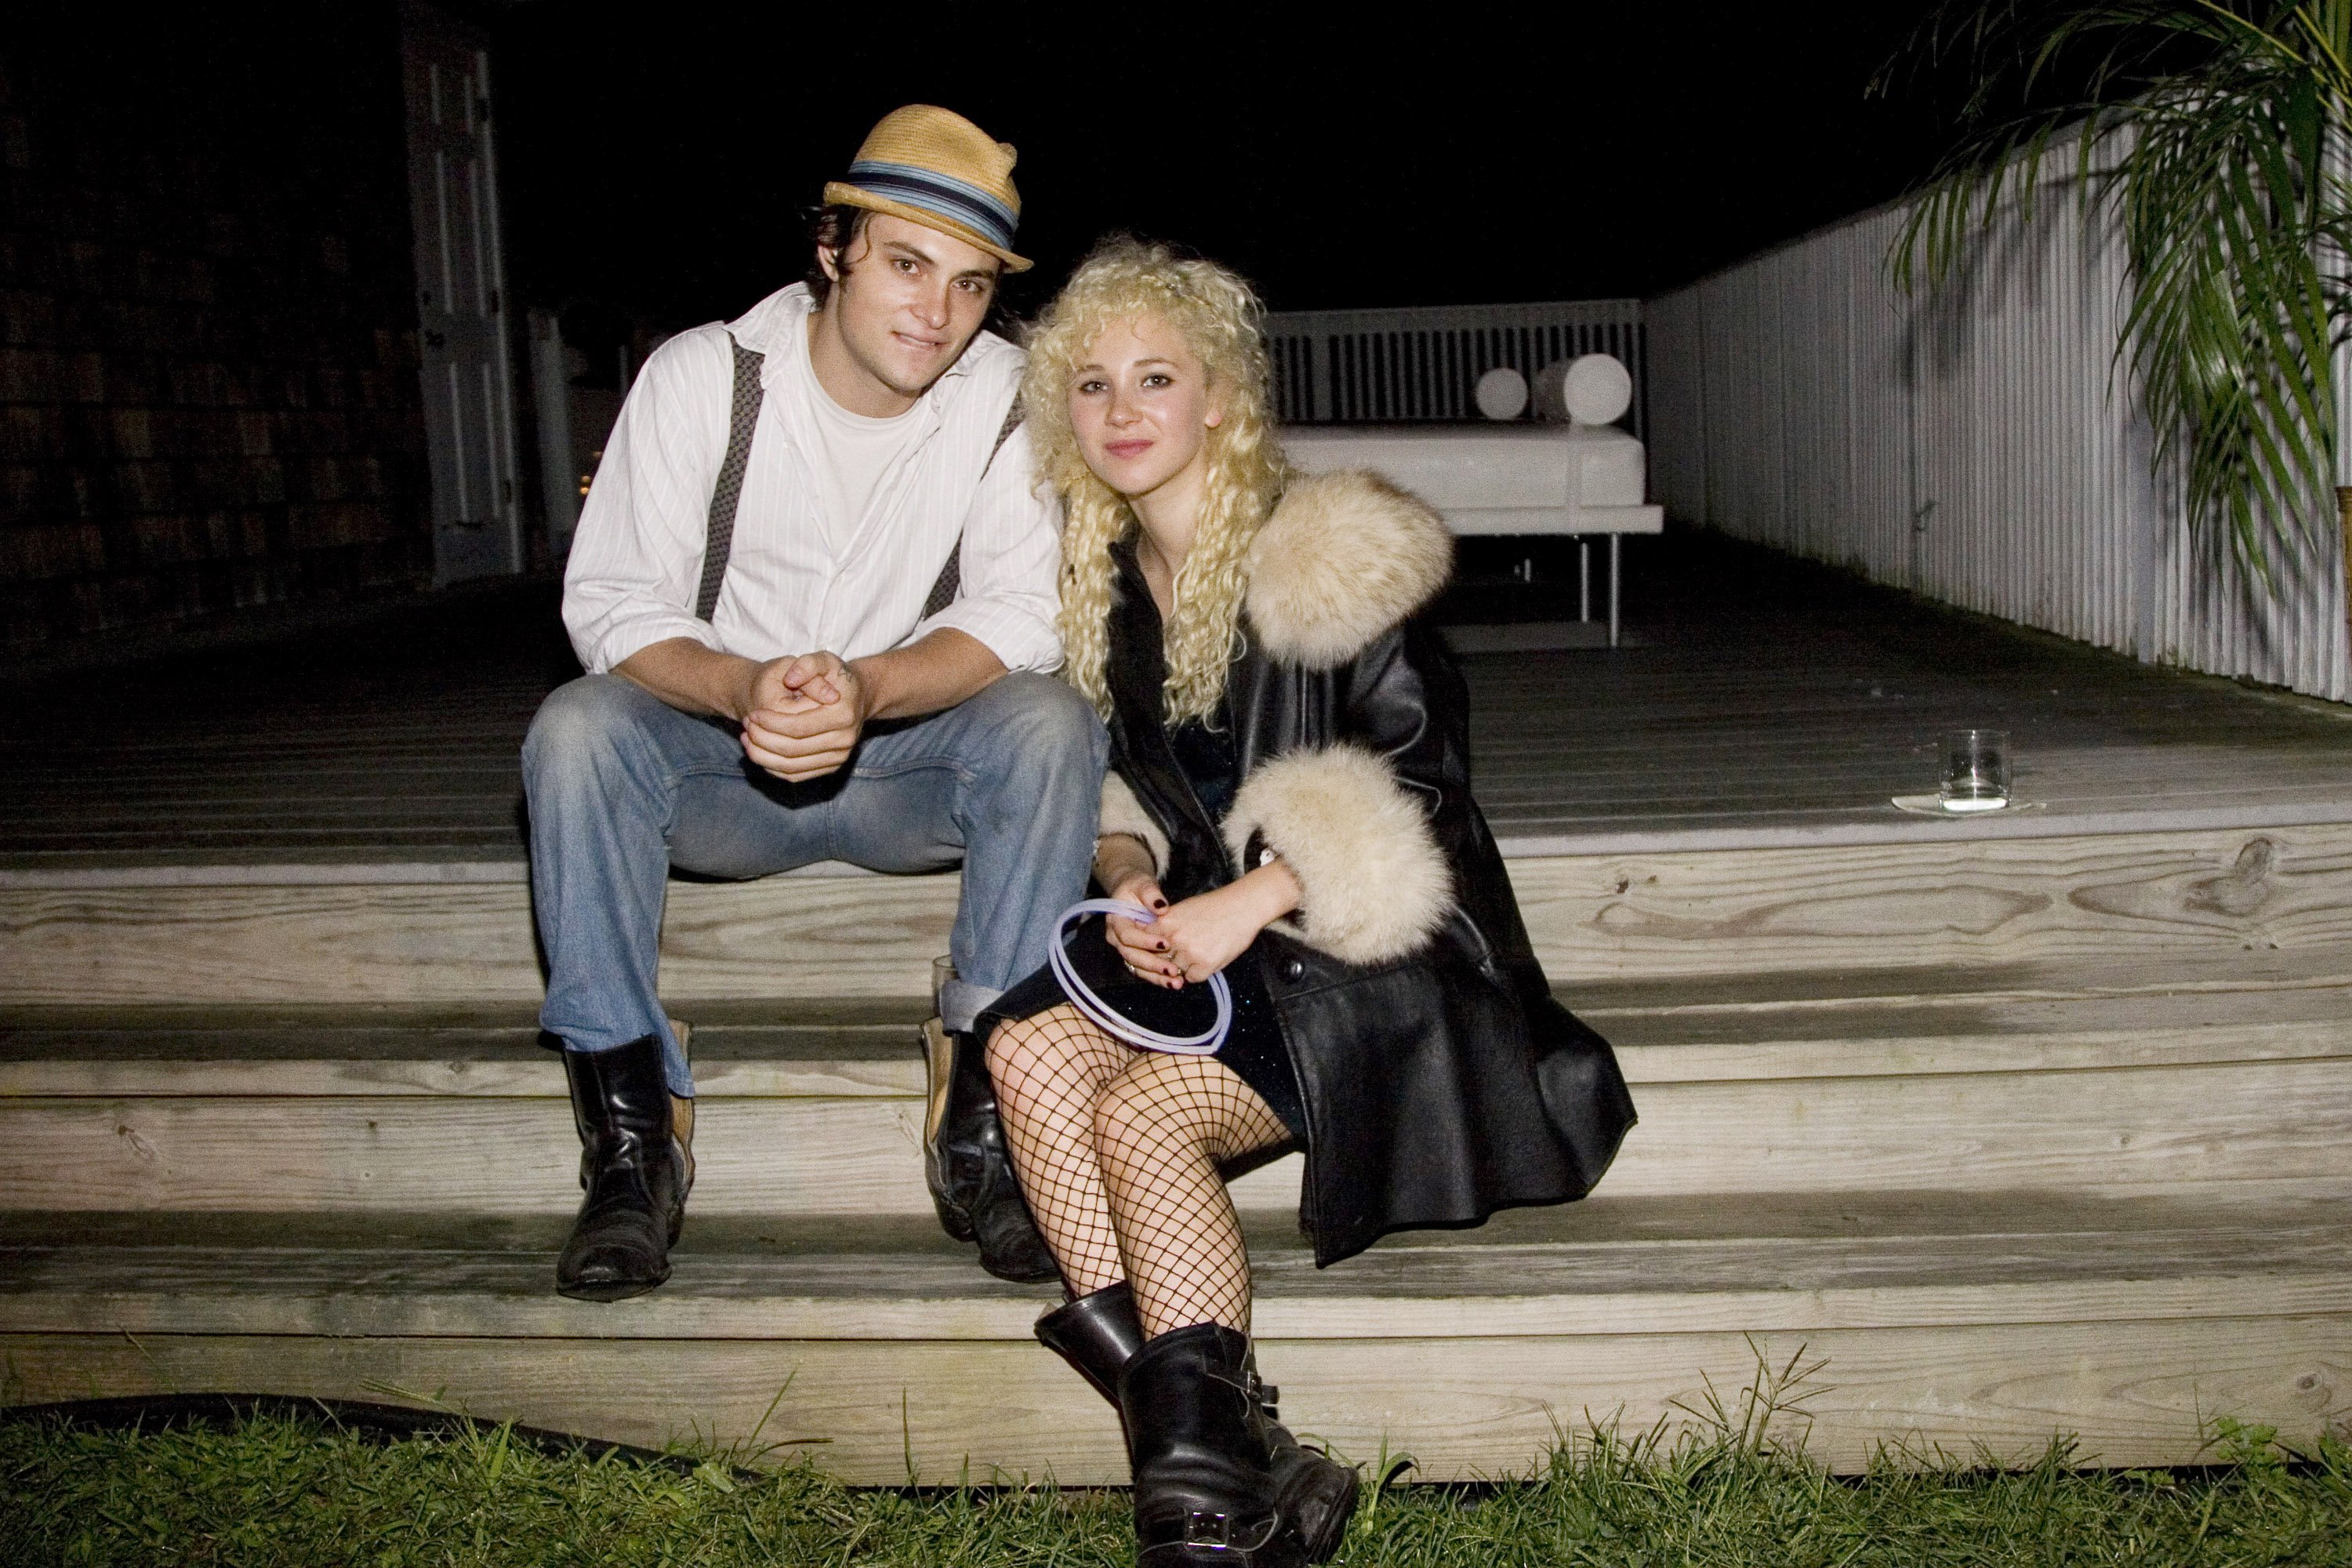 Shiloh Fernandez and Juno Temple attends Bluhammock Music's 2nd Annual Blu Party and Fundraiser at a private estate on August 29, 2008 in Watermill, New York. | Source: Getty Images)